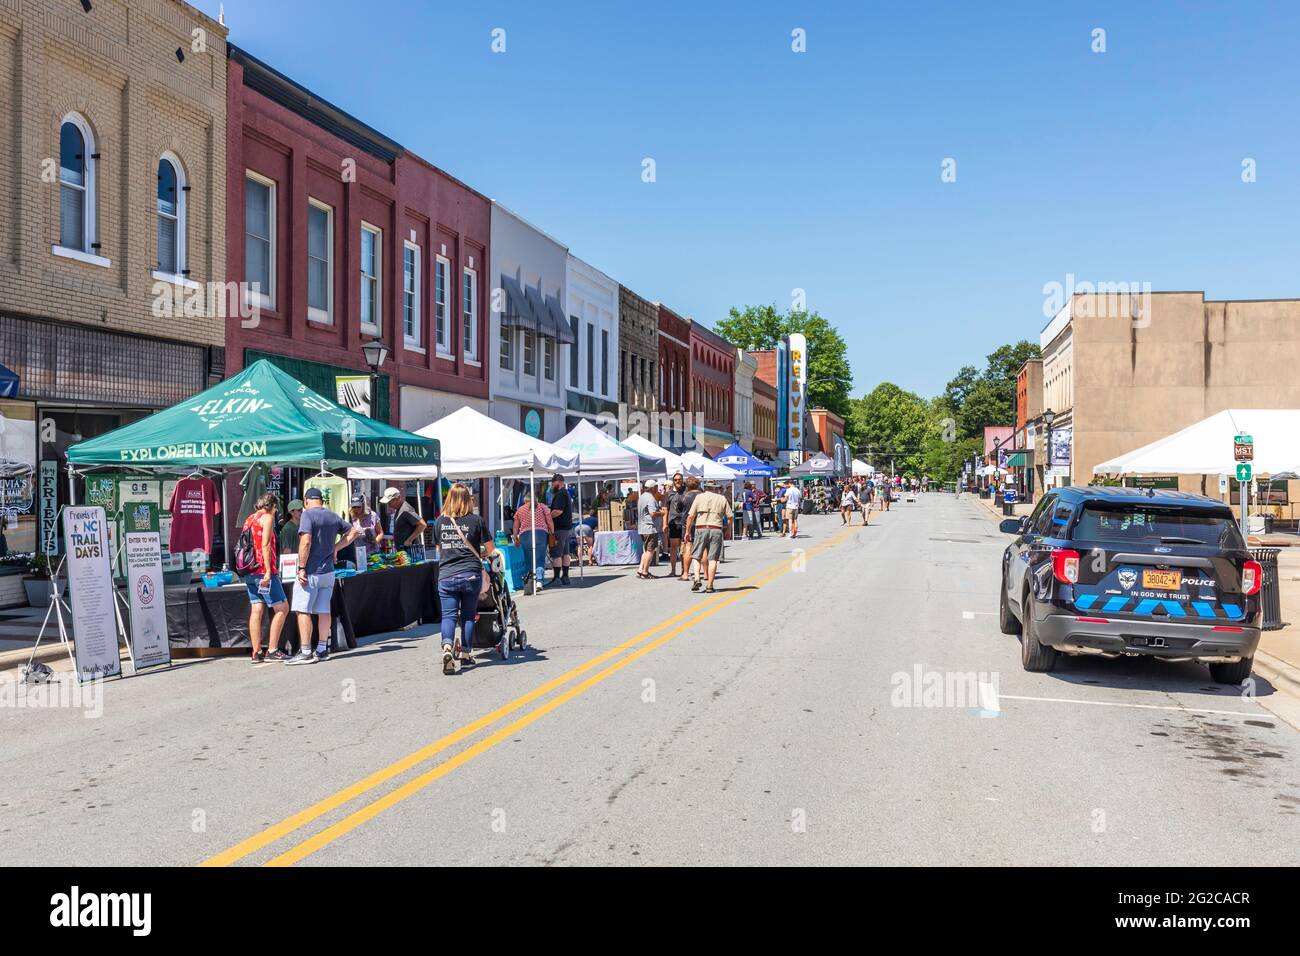 ELKIN, NC, USA-5 JUNE 2021: A street festival, with vendors under shading canopies, and many people. Horizontal image. Stock Photo